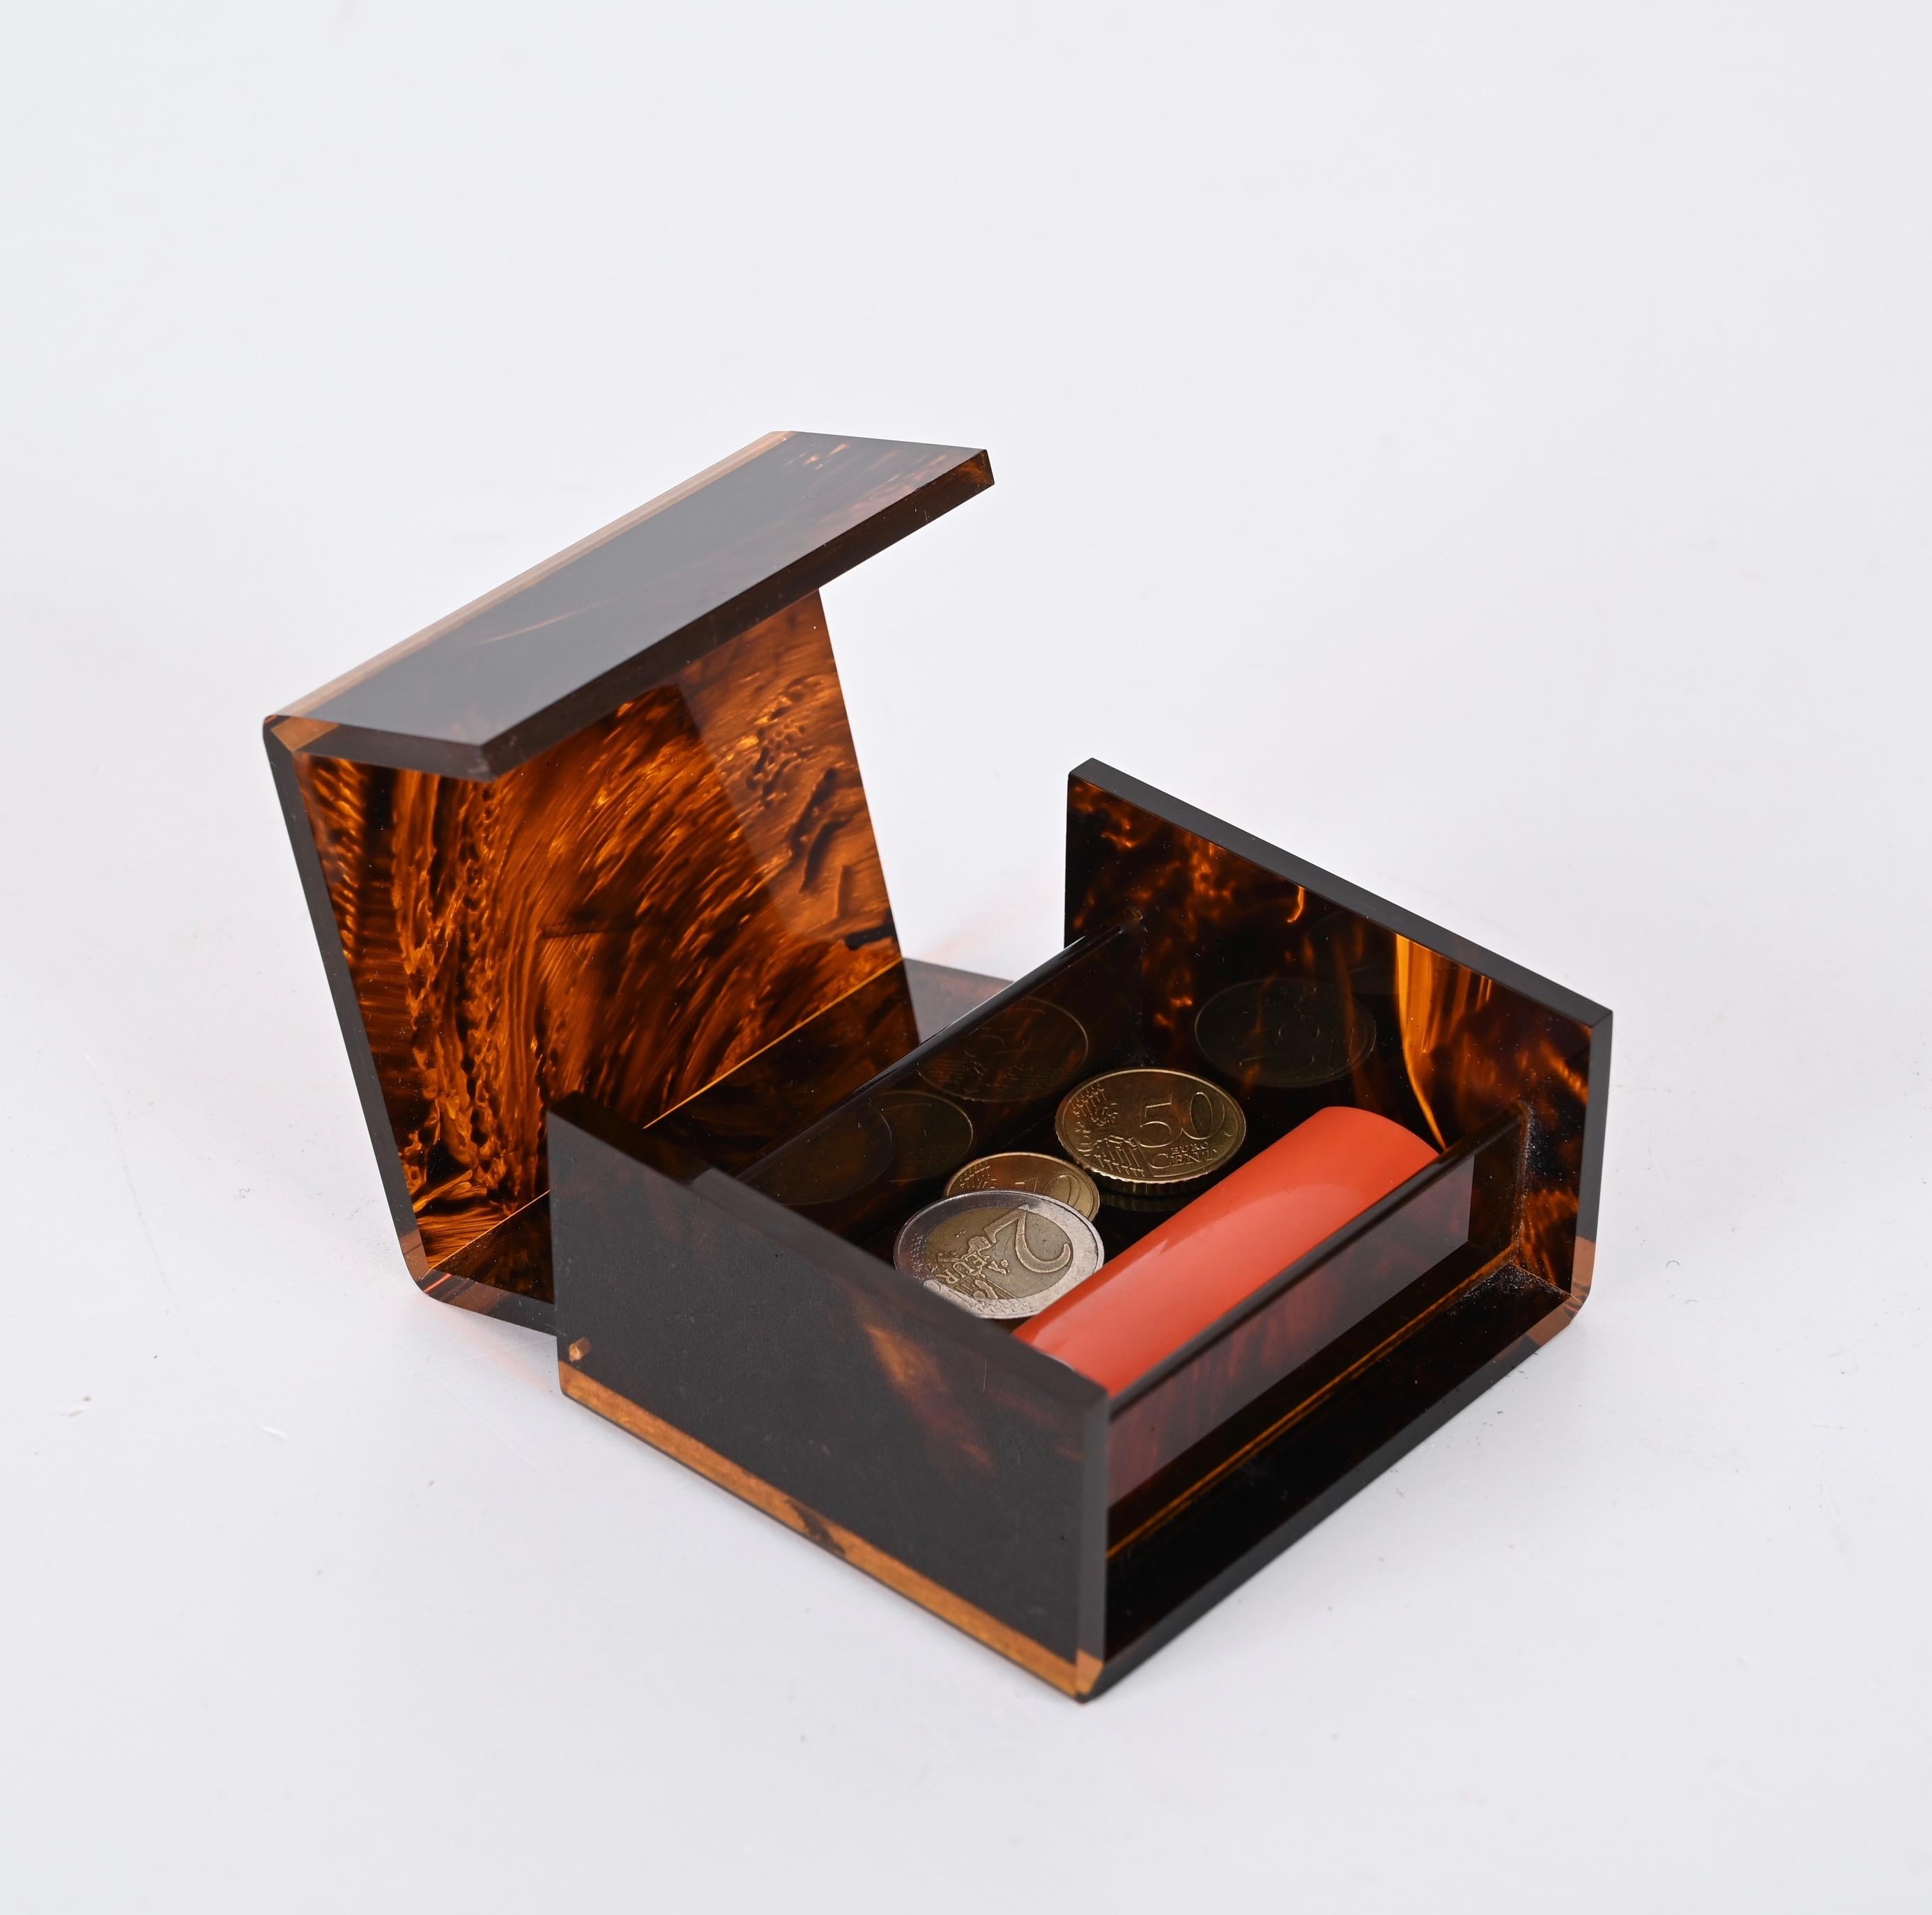 Wonderful midcentury lucite jewelery box by Roberto Cavalli, with a stunning tortoiseshell effect. This gorgeous piece was produced in Italy in the 1970s.

This object is timeless as the simplicity and elegance of its lines represent the essence